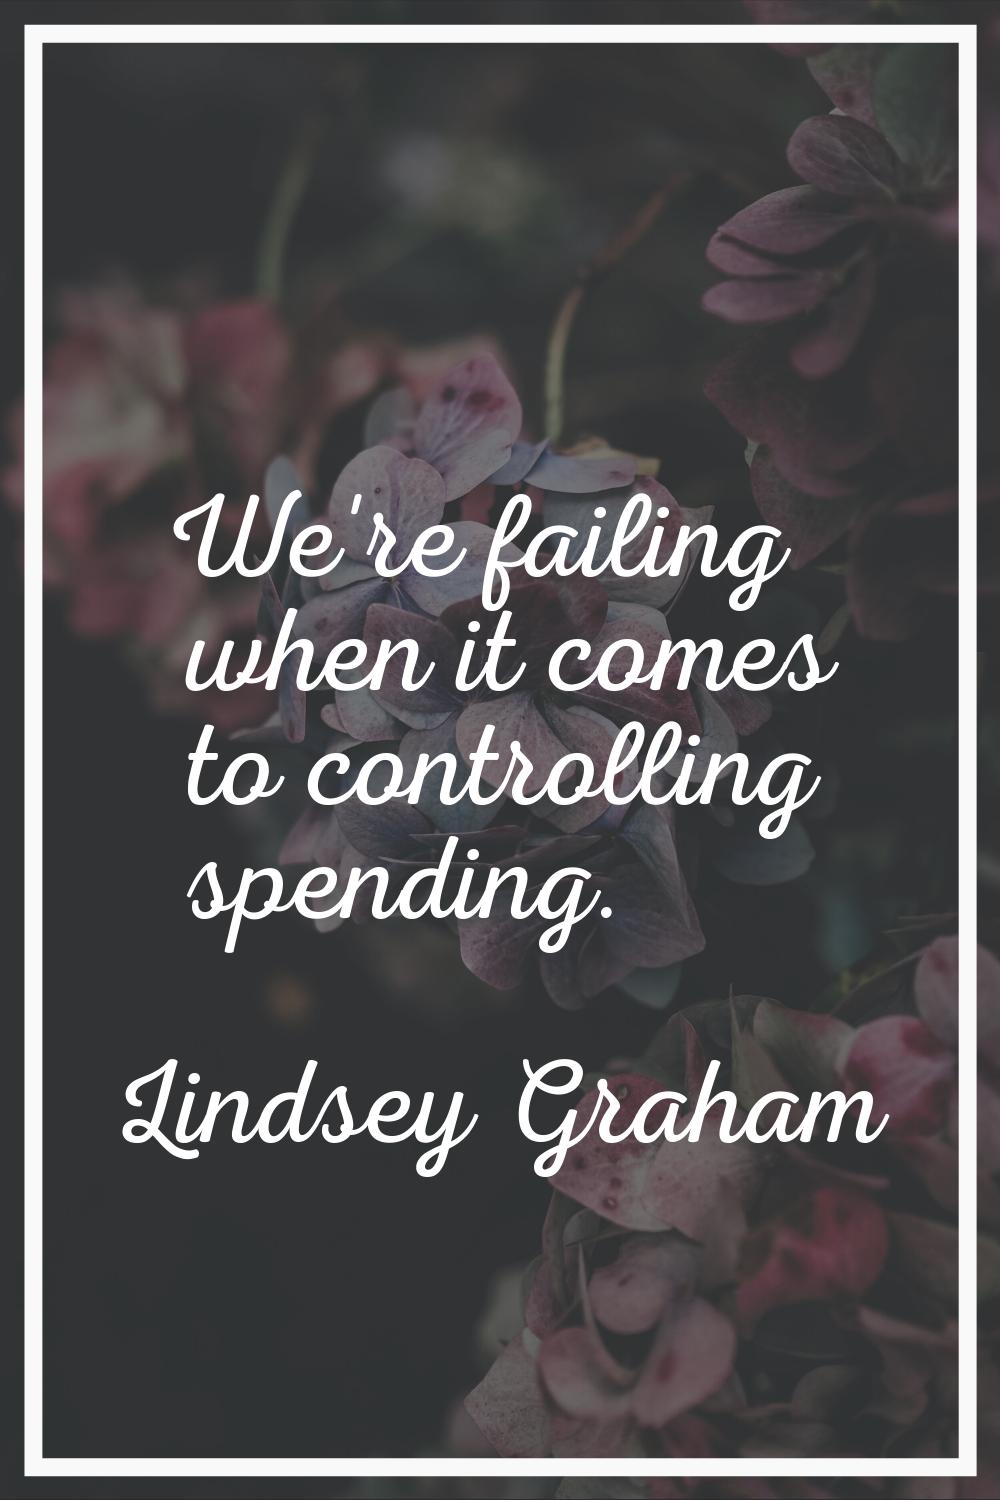 We're failing when it comes to controlling spending.